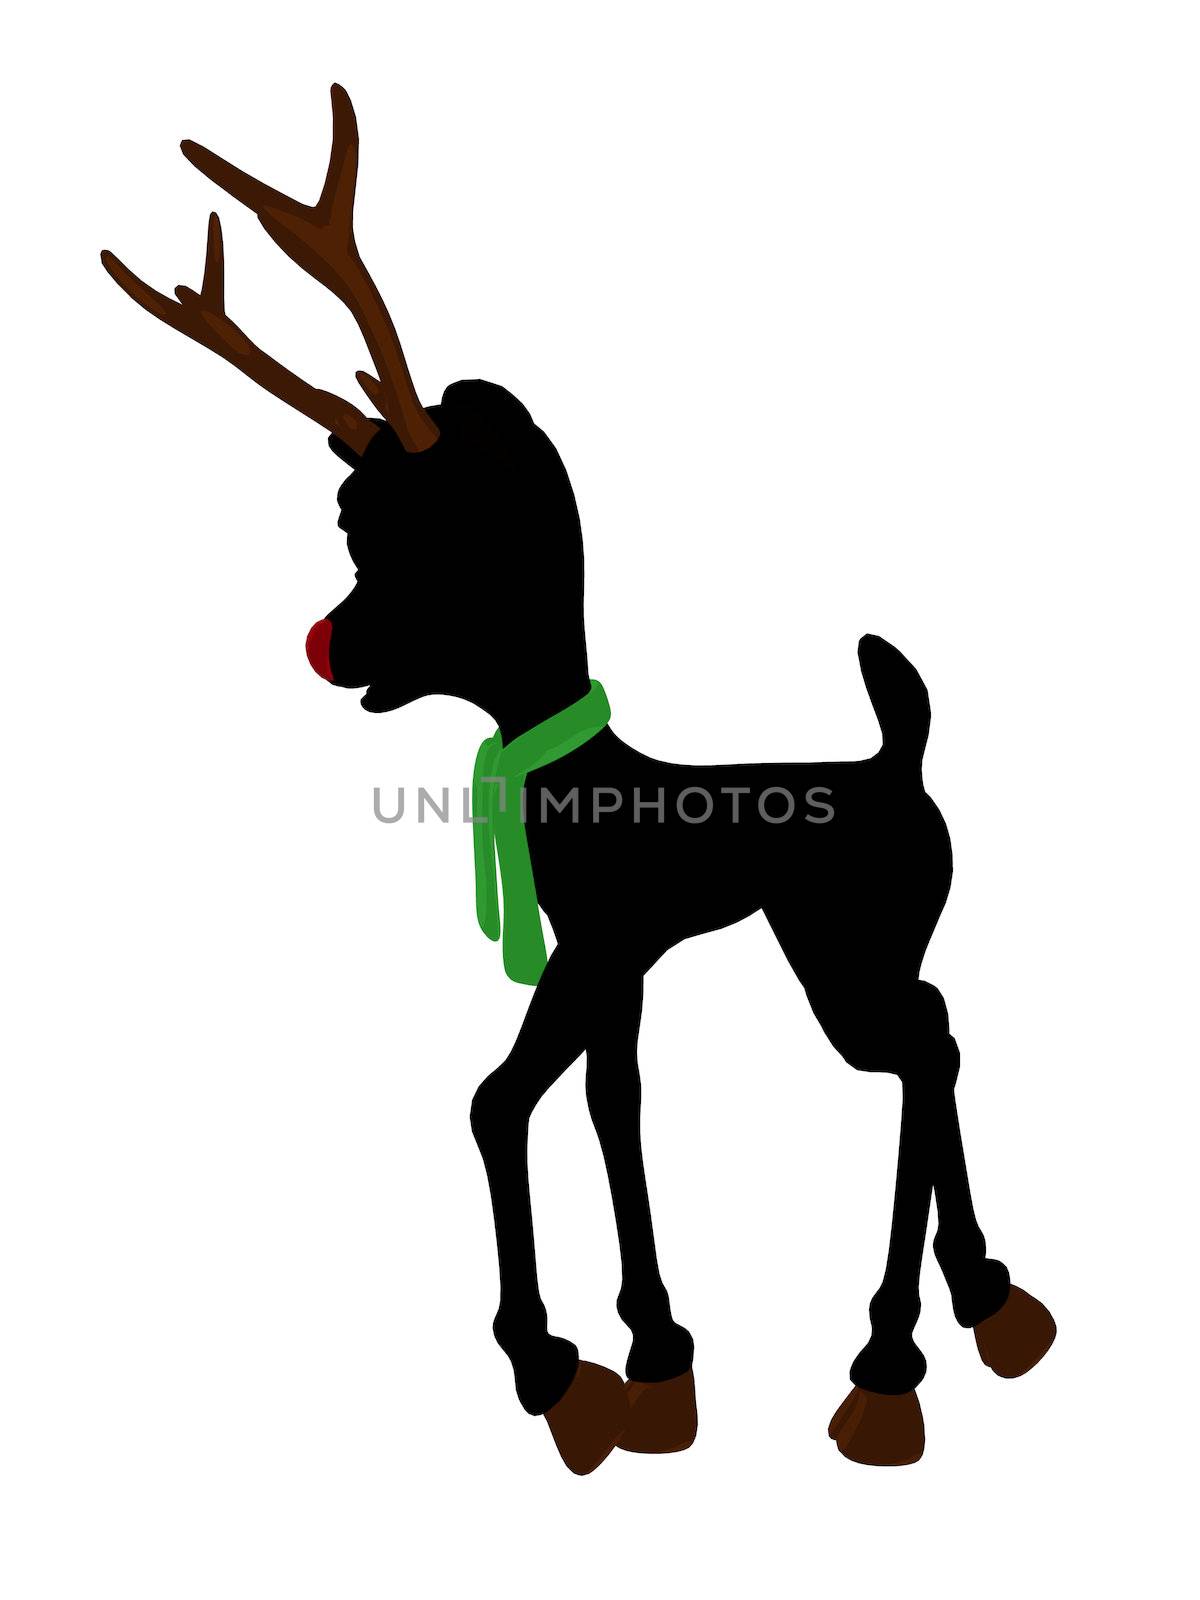 Rudolph The Red Nosed Reindeer Silhouette Illustration by kathygold